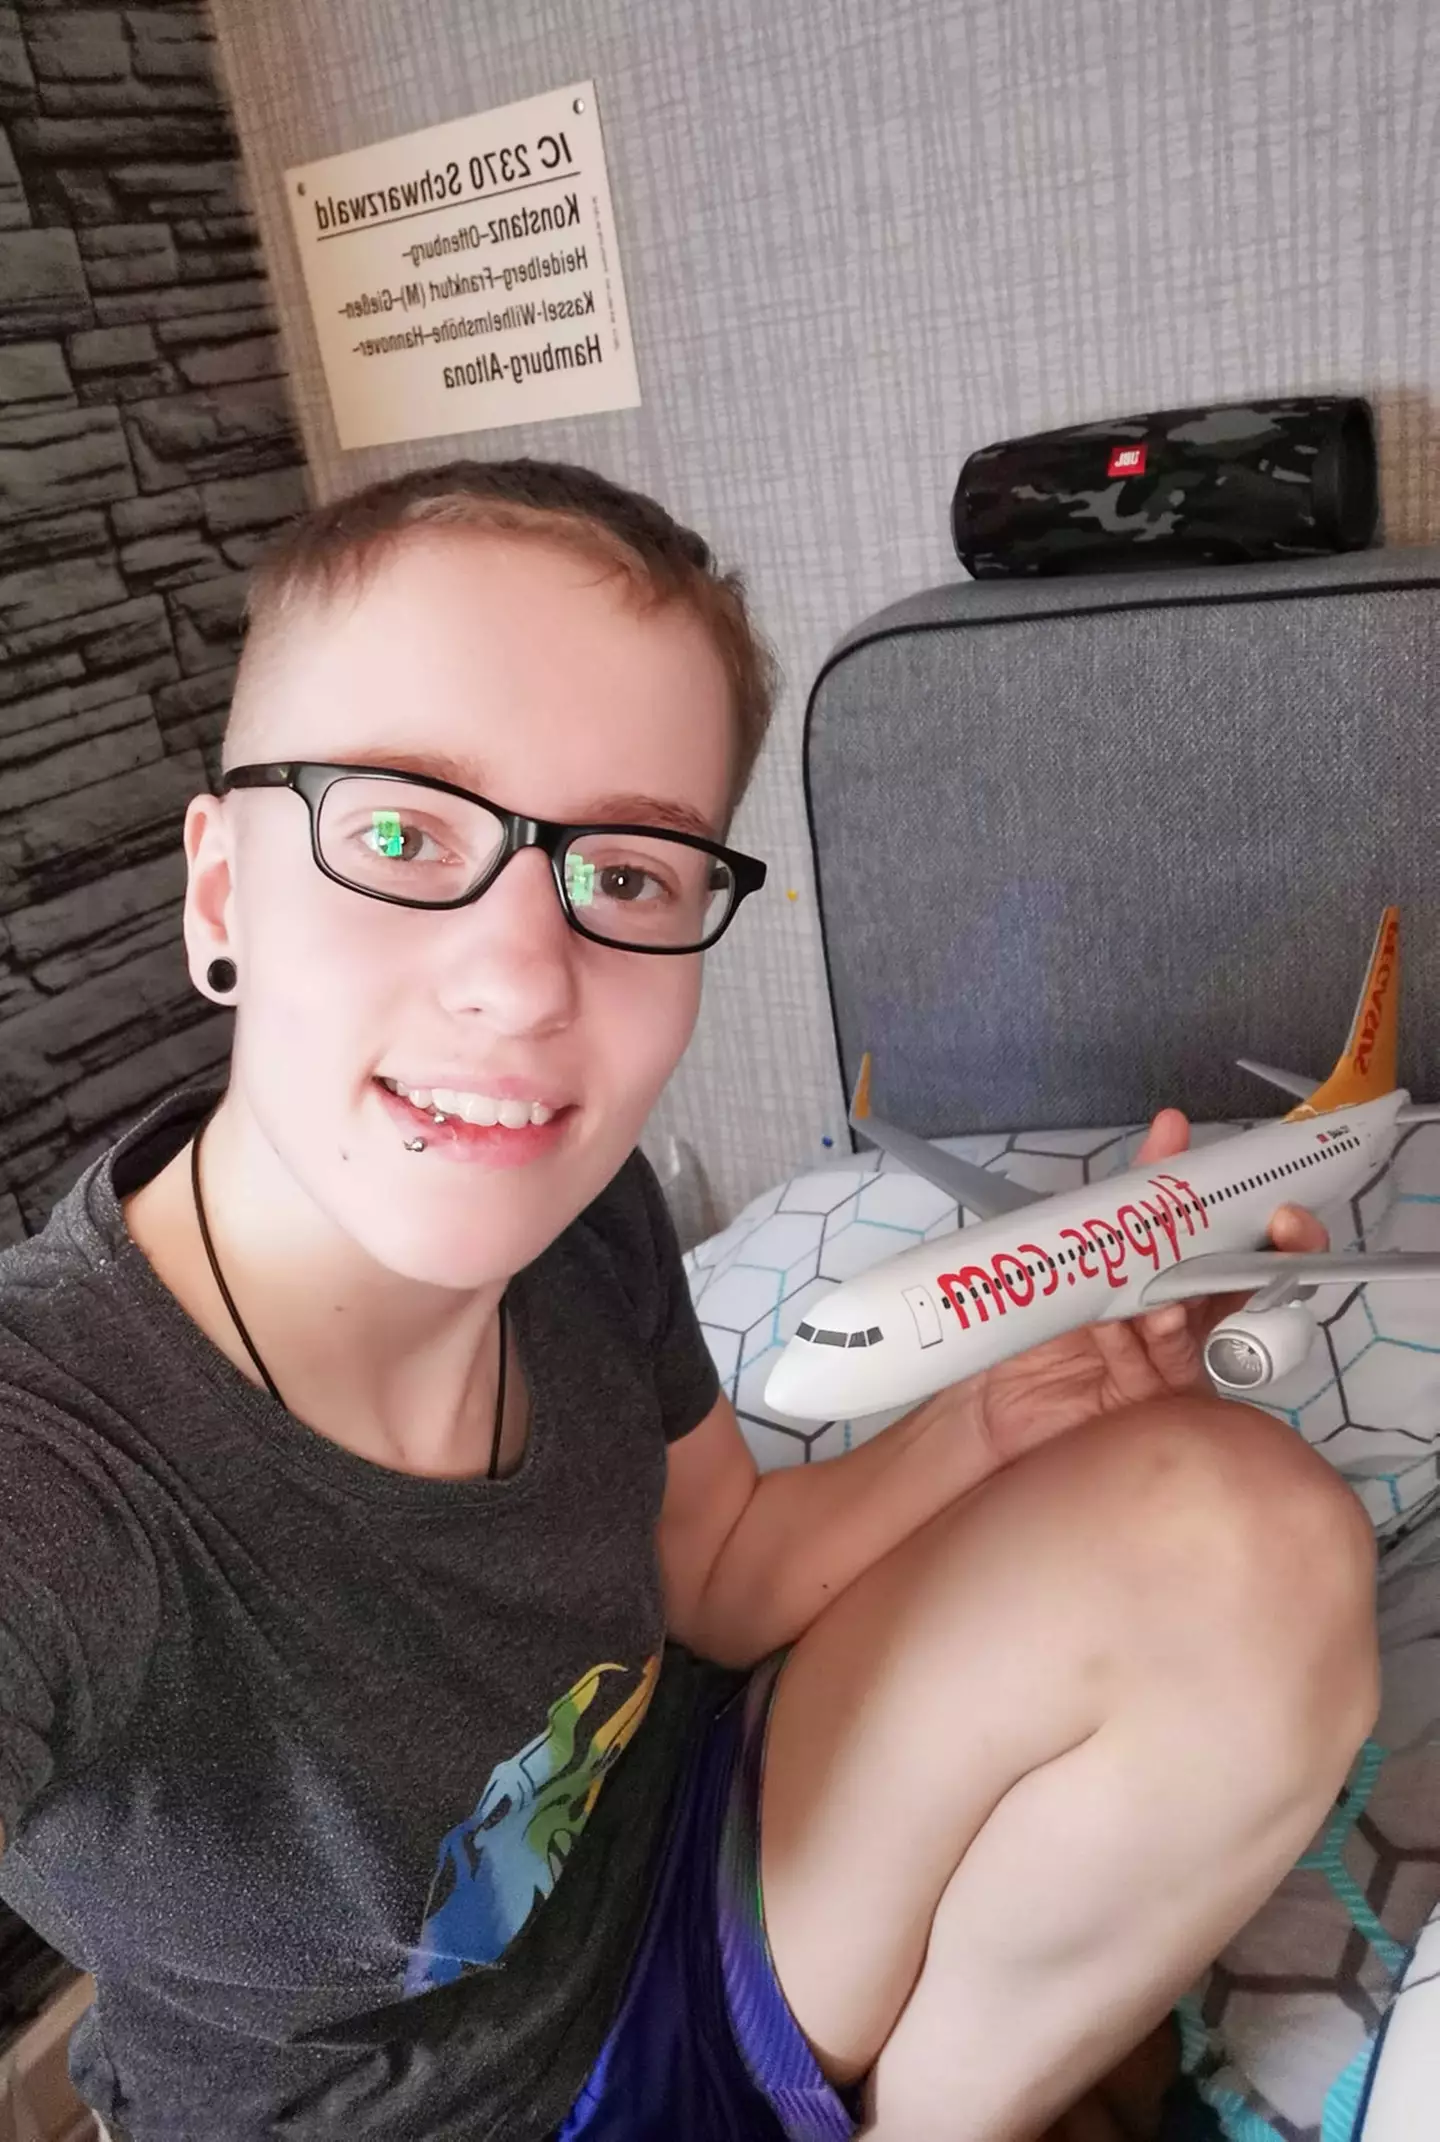 Sarah Robo says she is in a relationship with a plane.